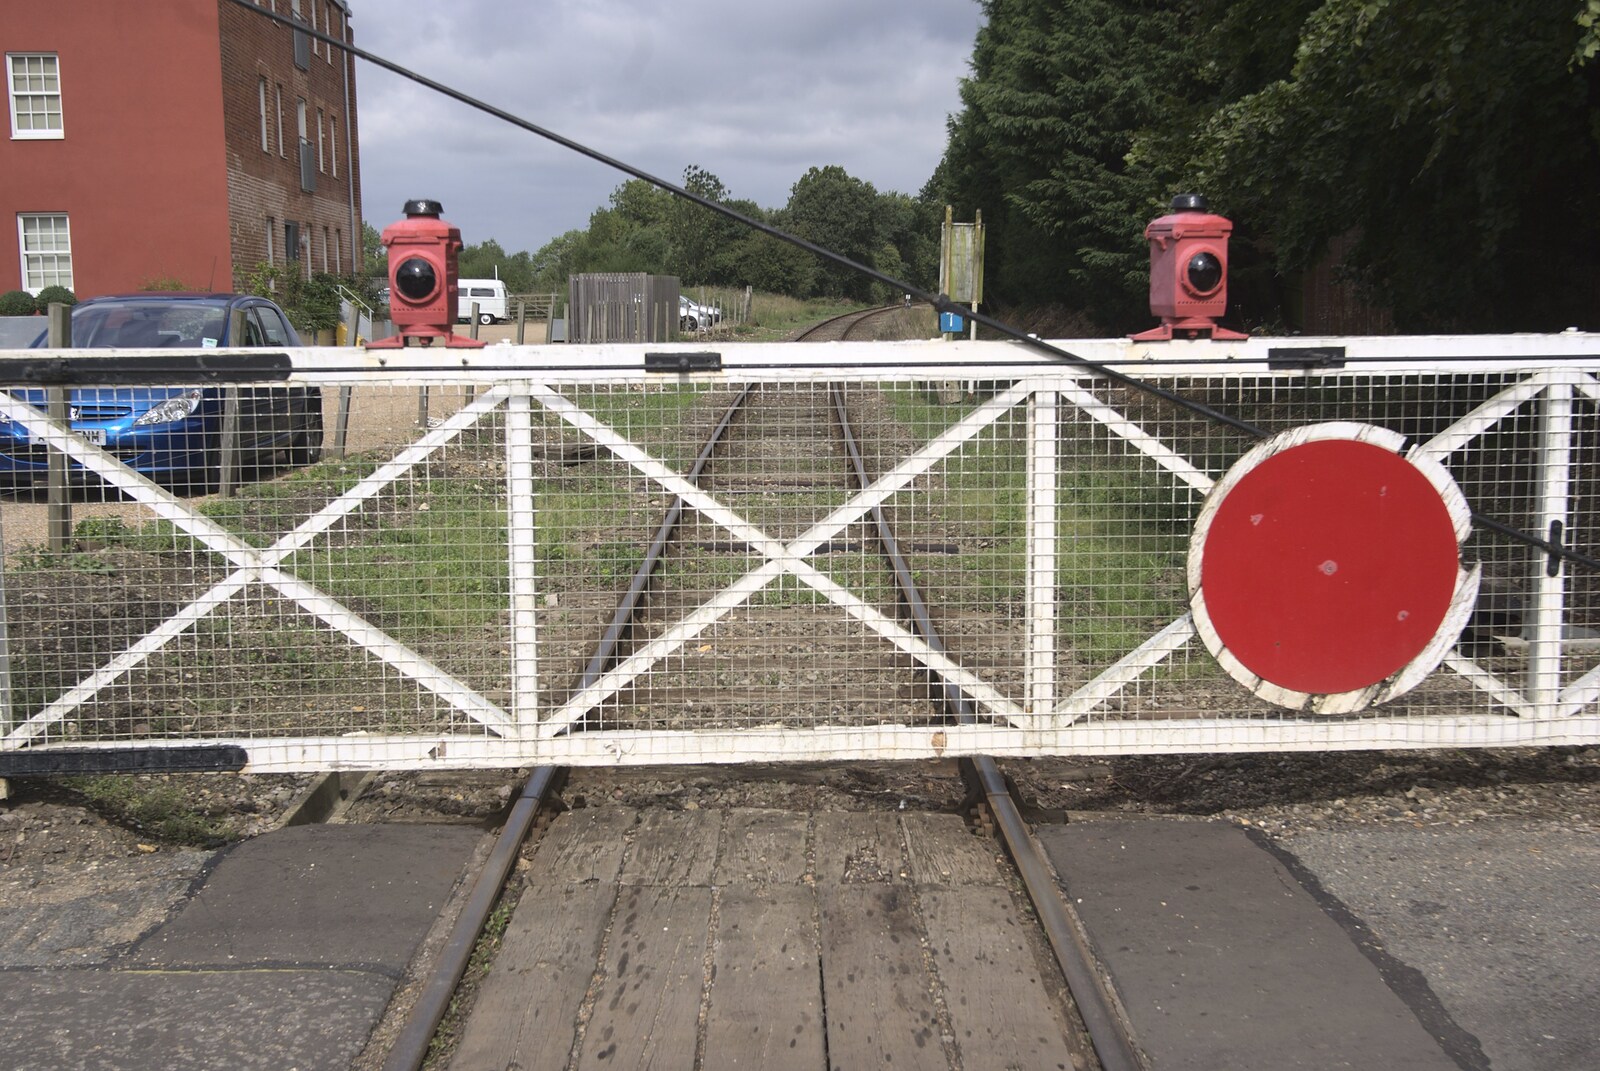 Camping with Trains, Yaxham, Norfolk - 29th August 2010: A level crossing at Yaxham